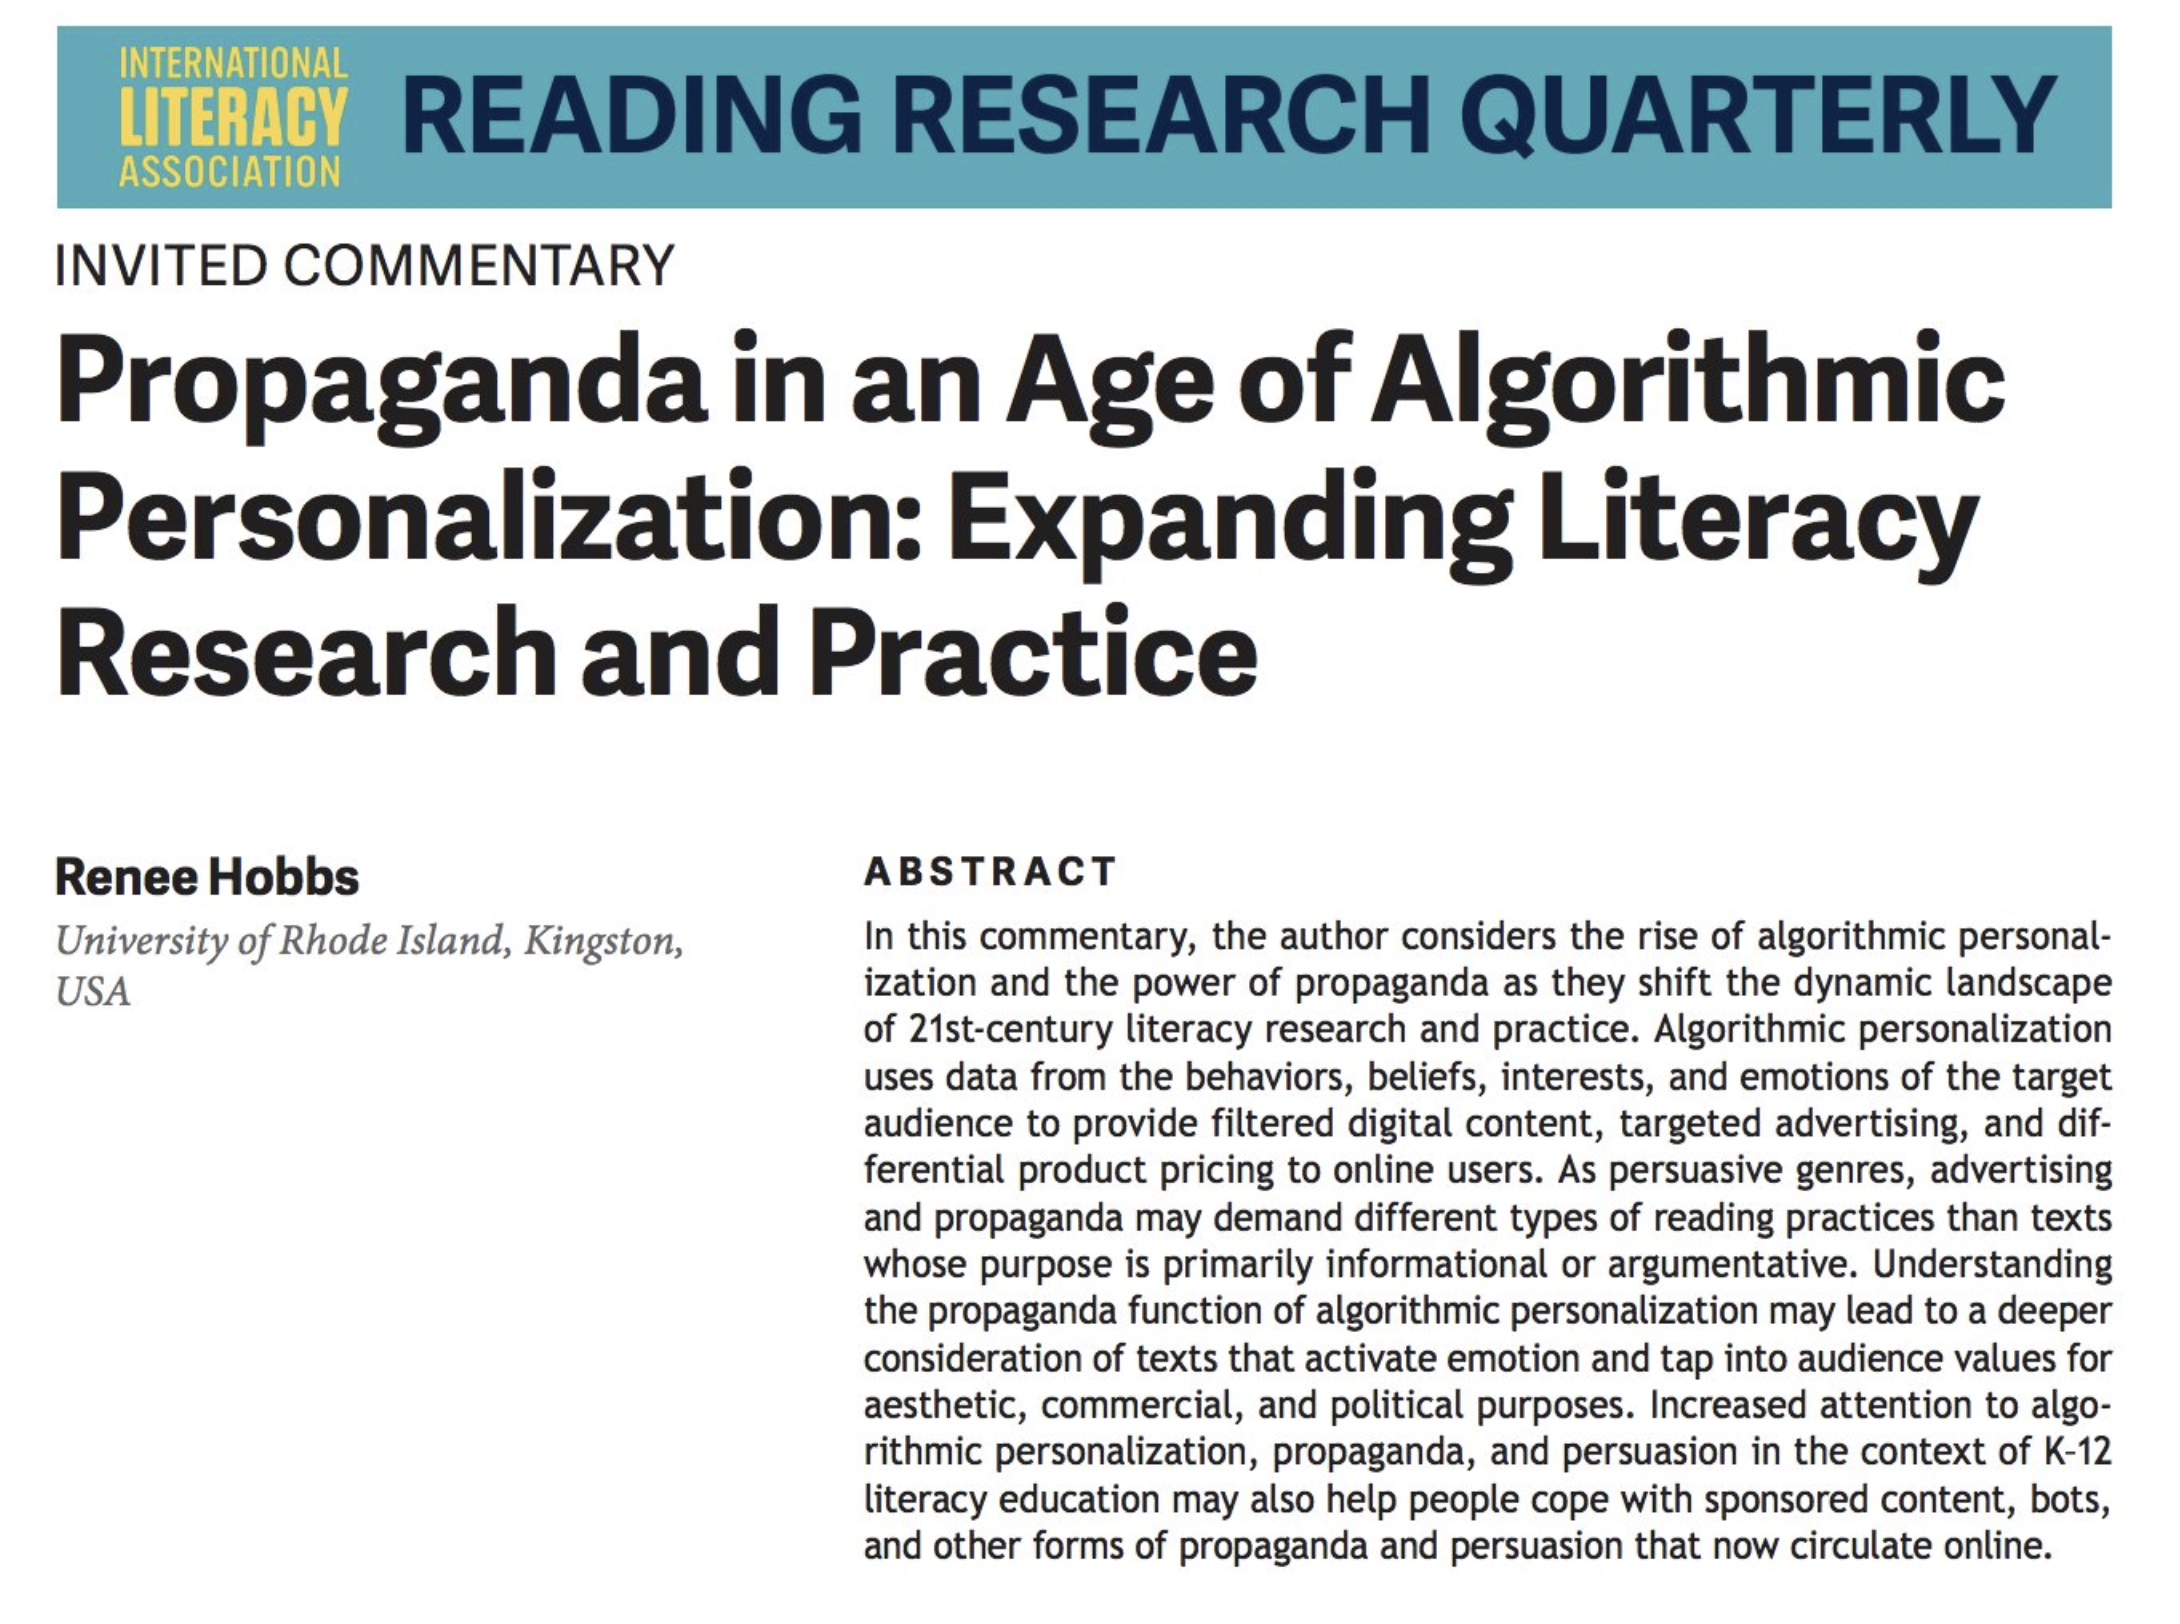 Propaganda in an Age of Algorithmic Personalization:  Expanding Literacy Research and Practice